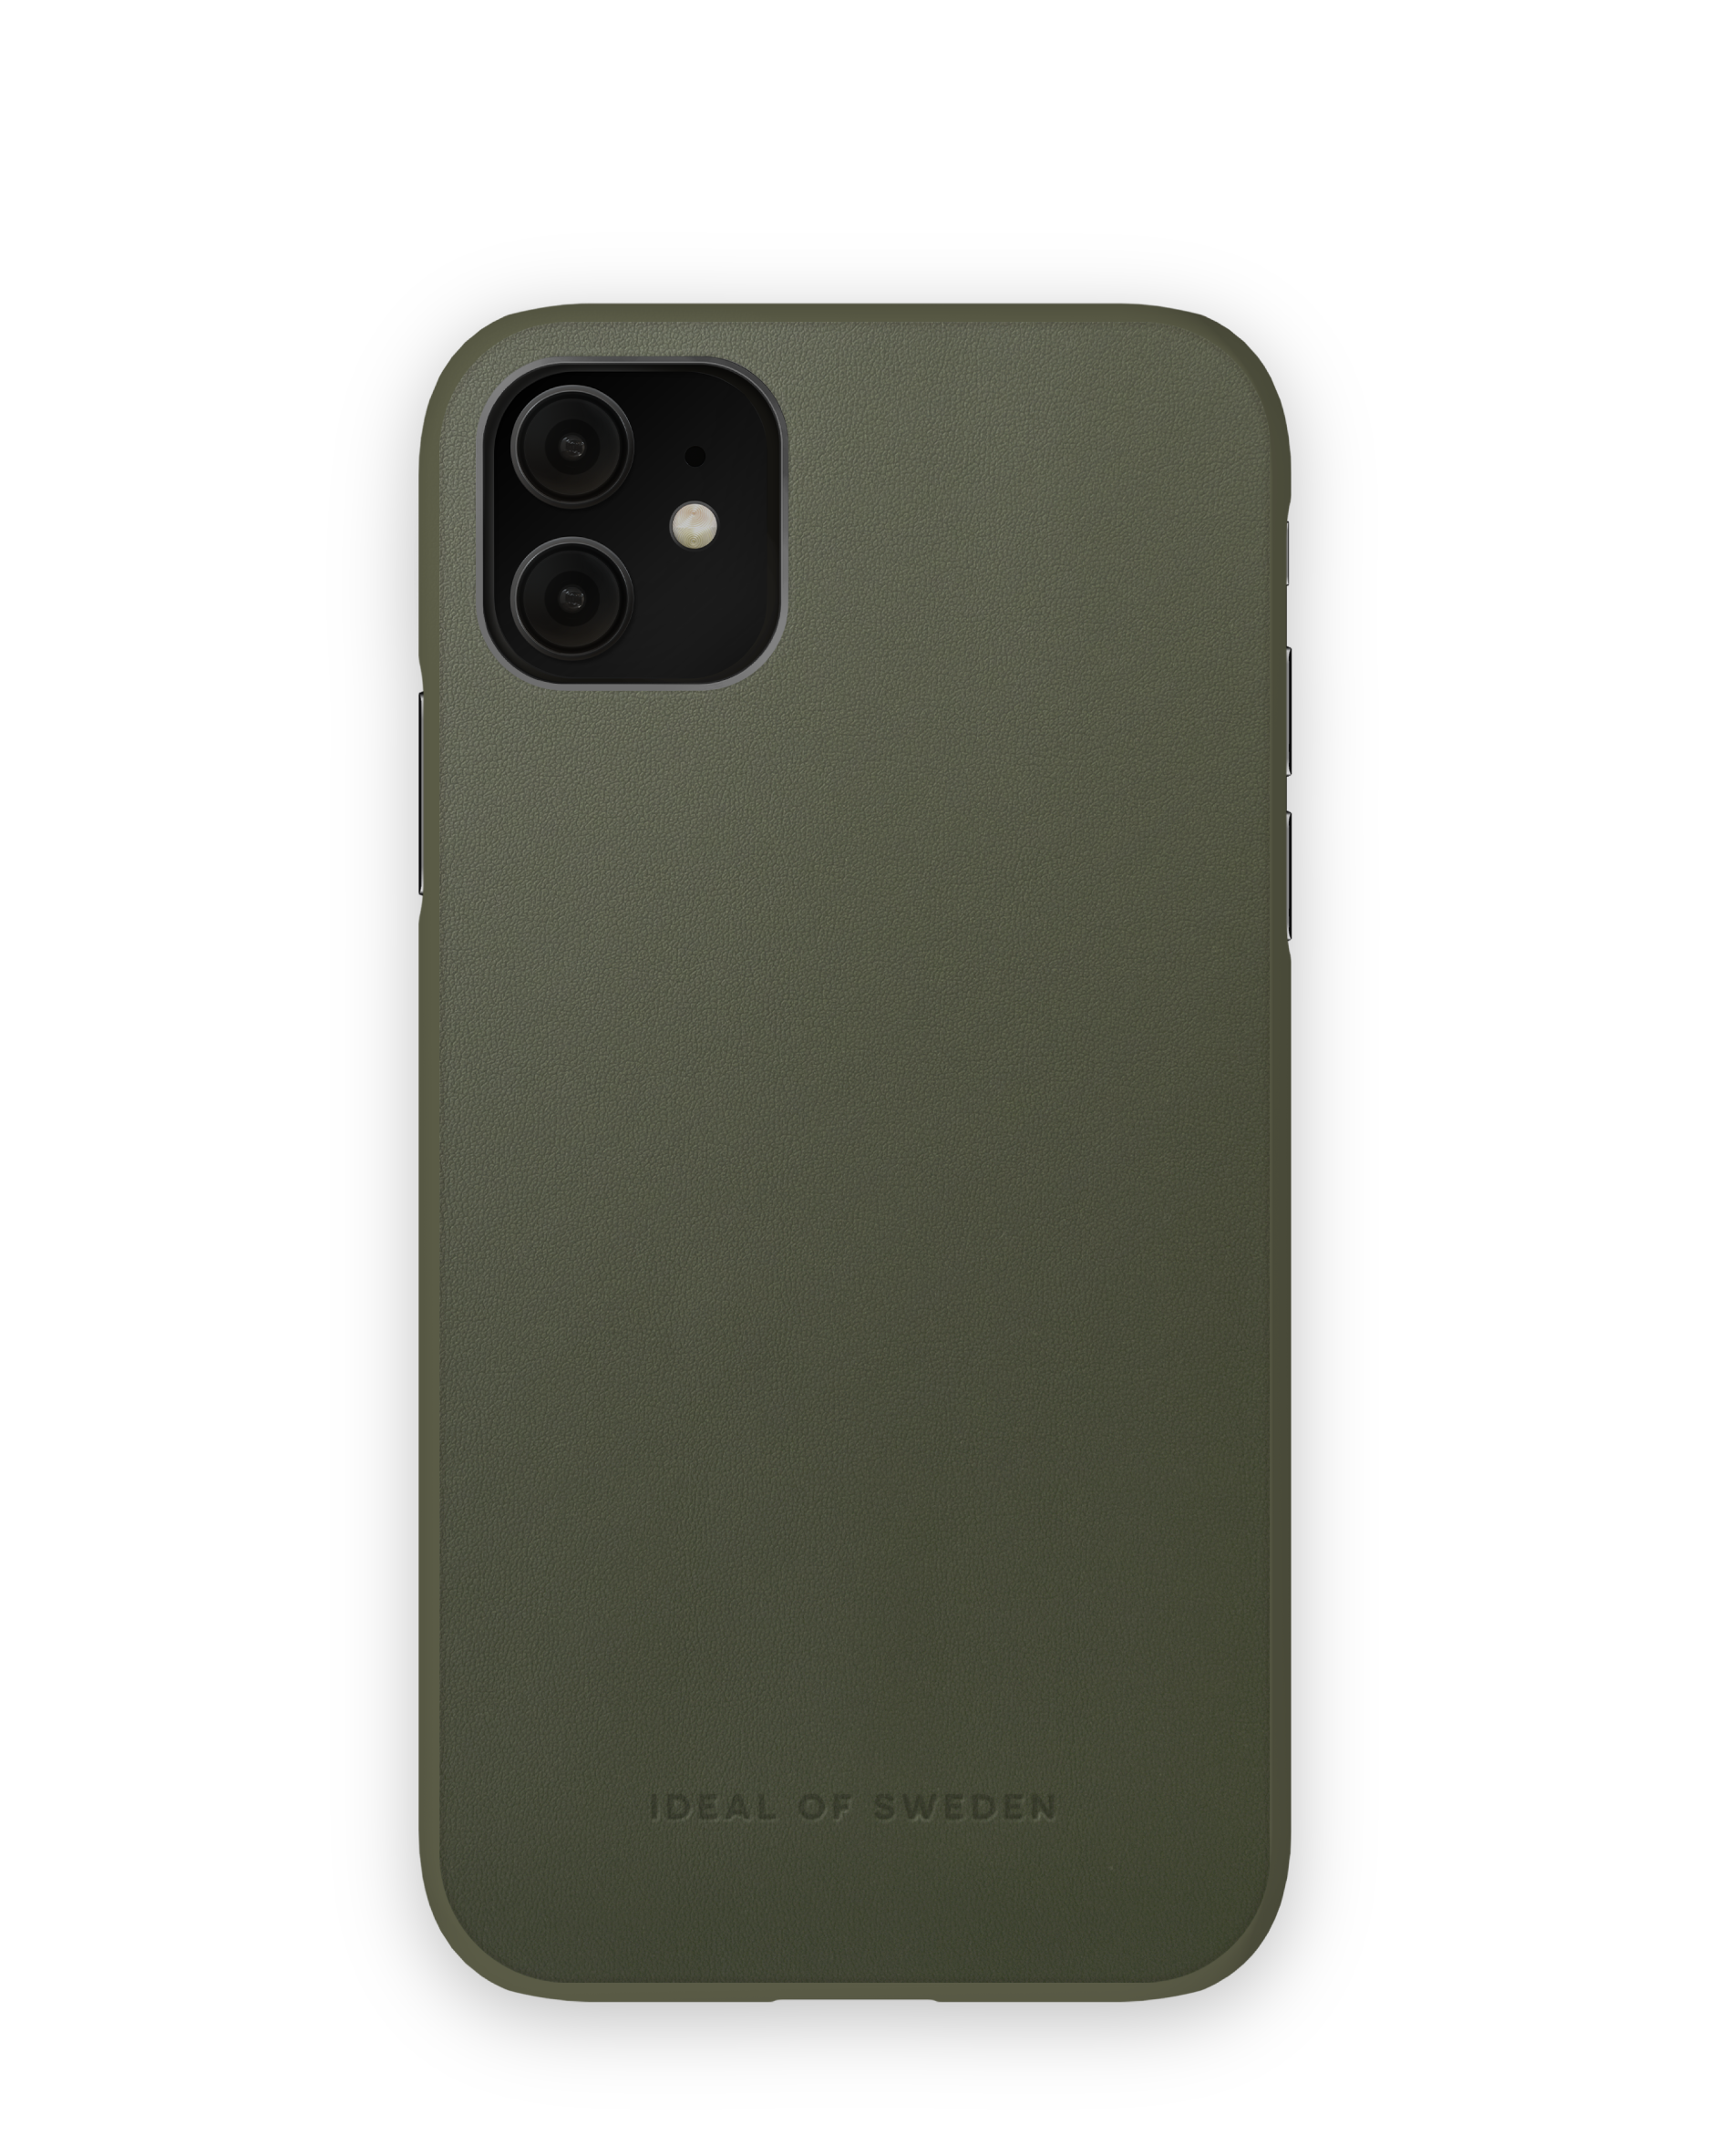 OF 11/XR, Backcover, IDACAW21-I1961-360, Khaki Apple, IDEAL SWEDEN iPhone Intense